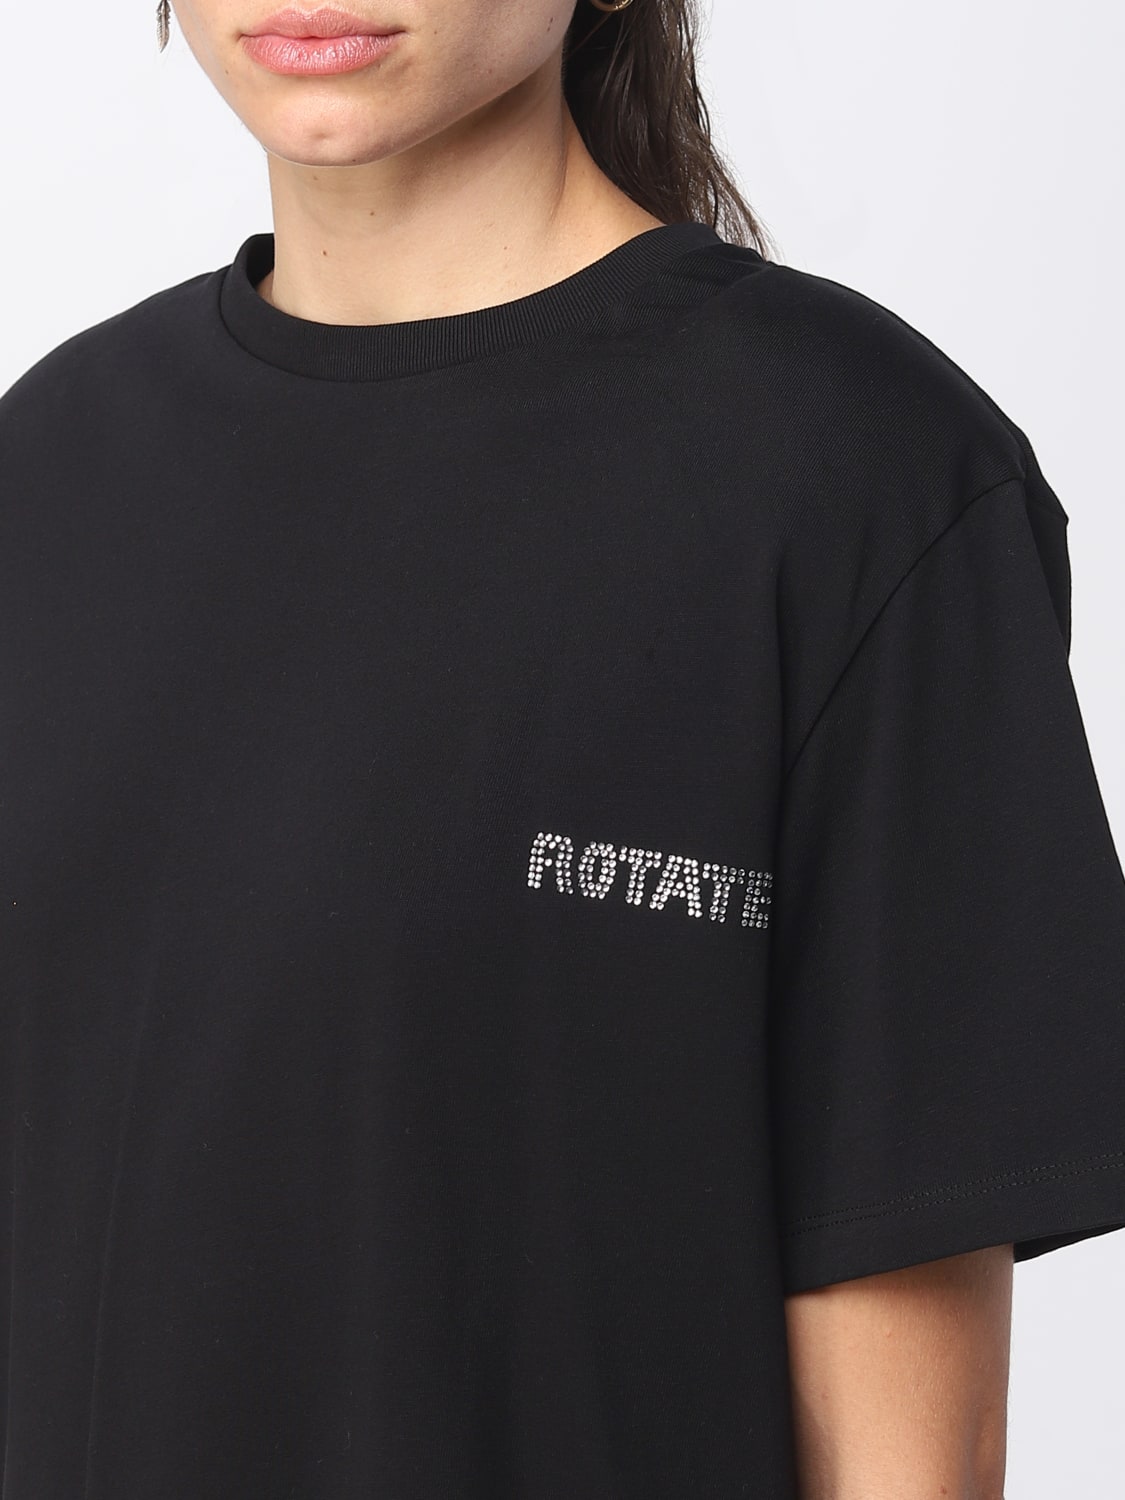 ROTATE: t-shirt for woman - Black | Rotate t-shirt 111212100 online at